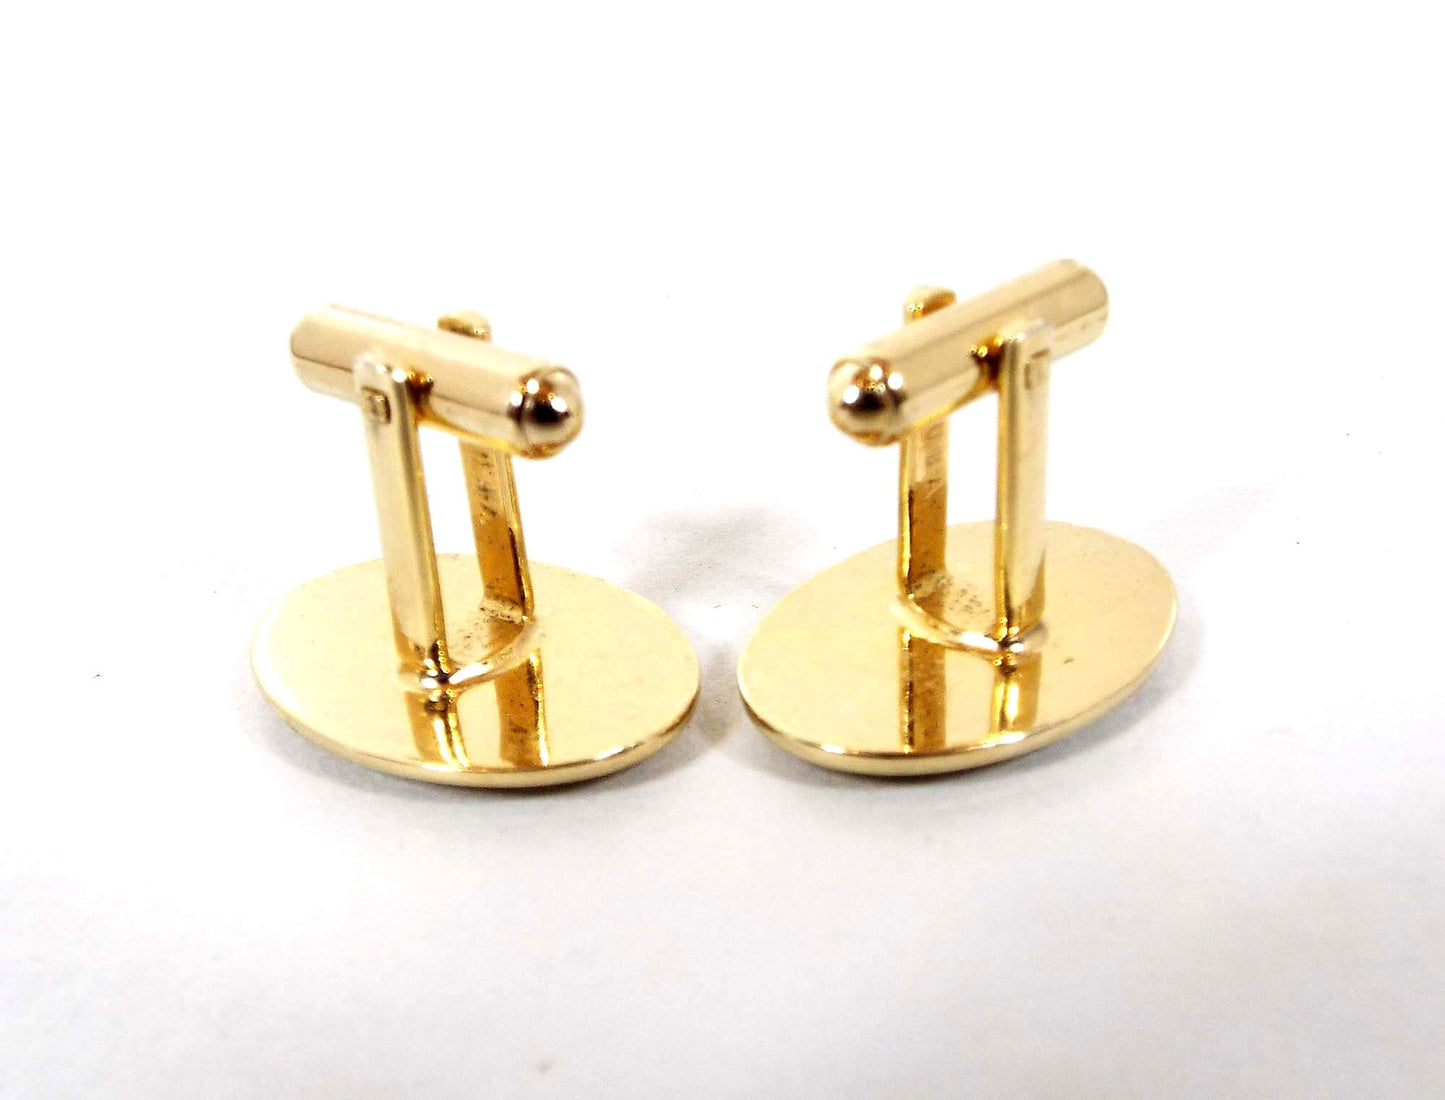 Hickok USA Two Tone Vintage Cufflinks, Oval Cuff Links